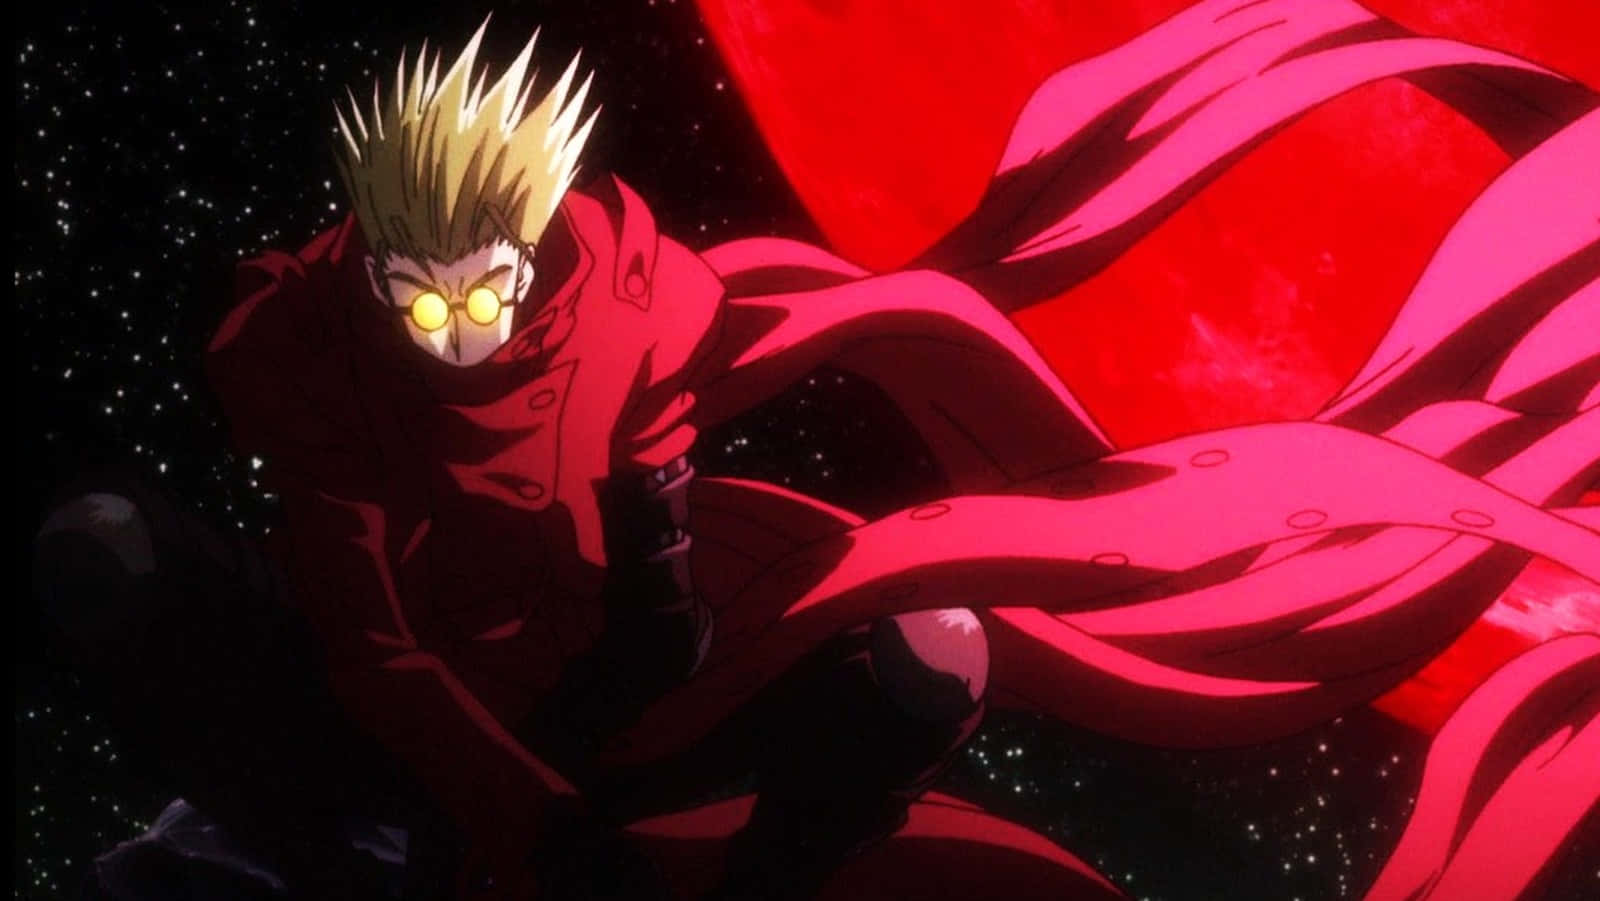 Vash the Stampede, the gun-slinging outlaw from Trigun